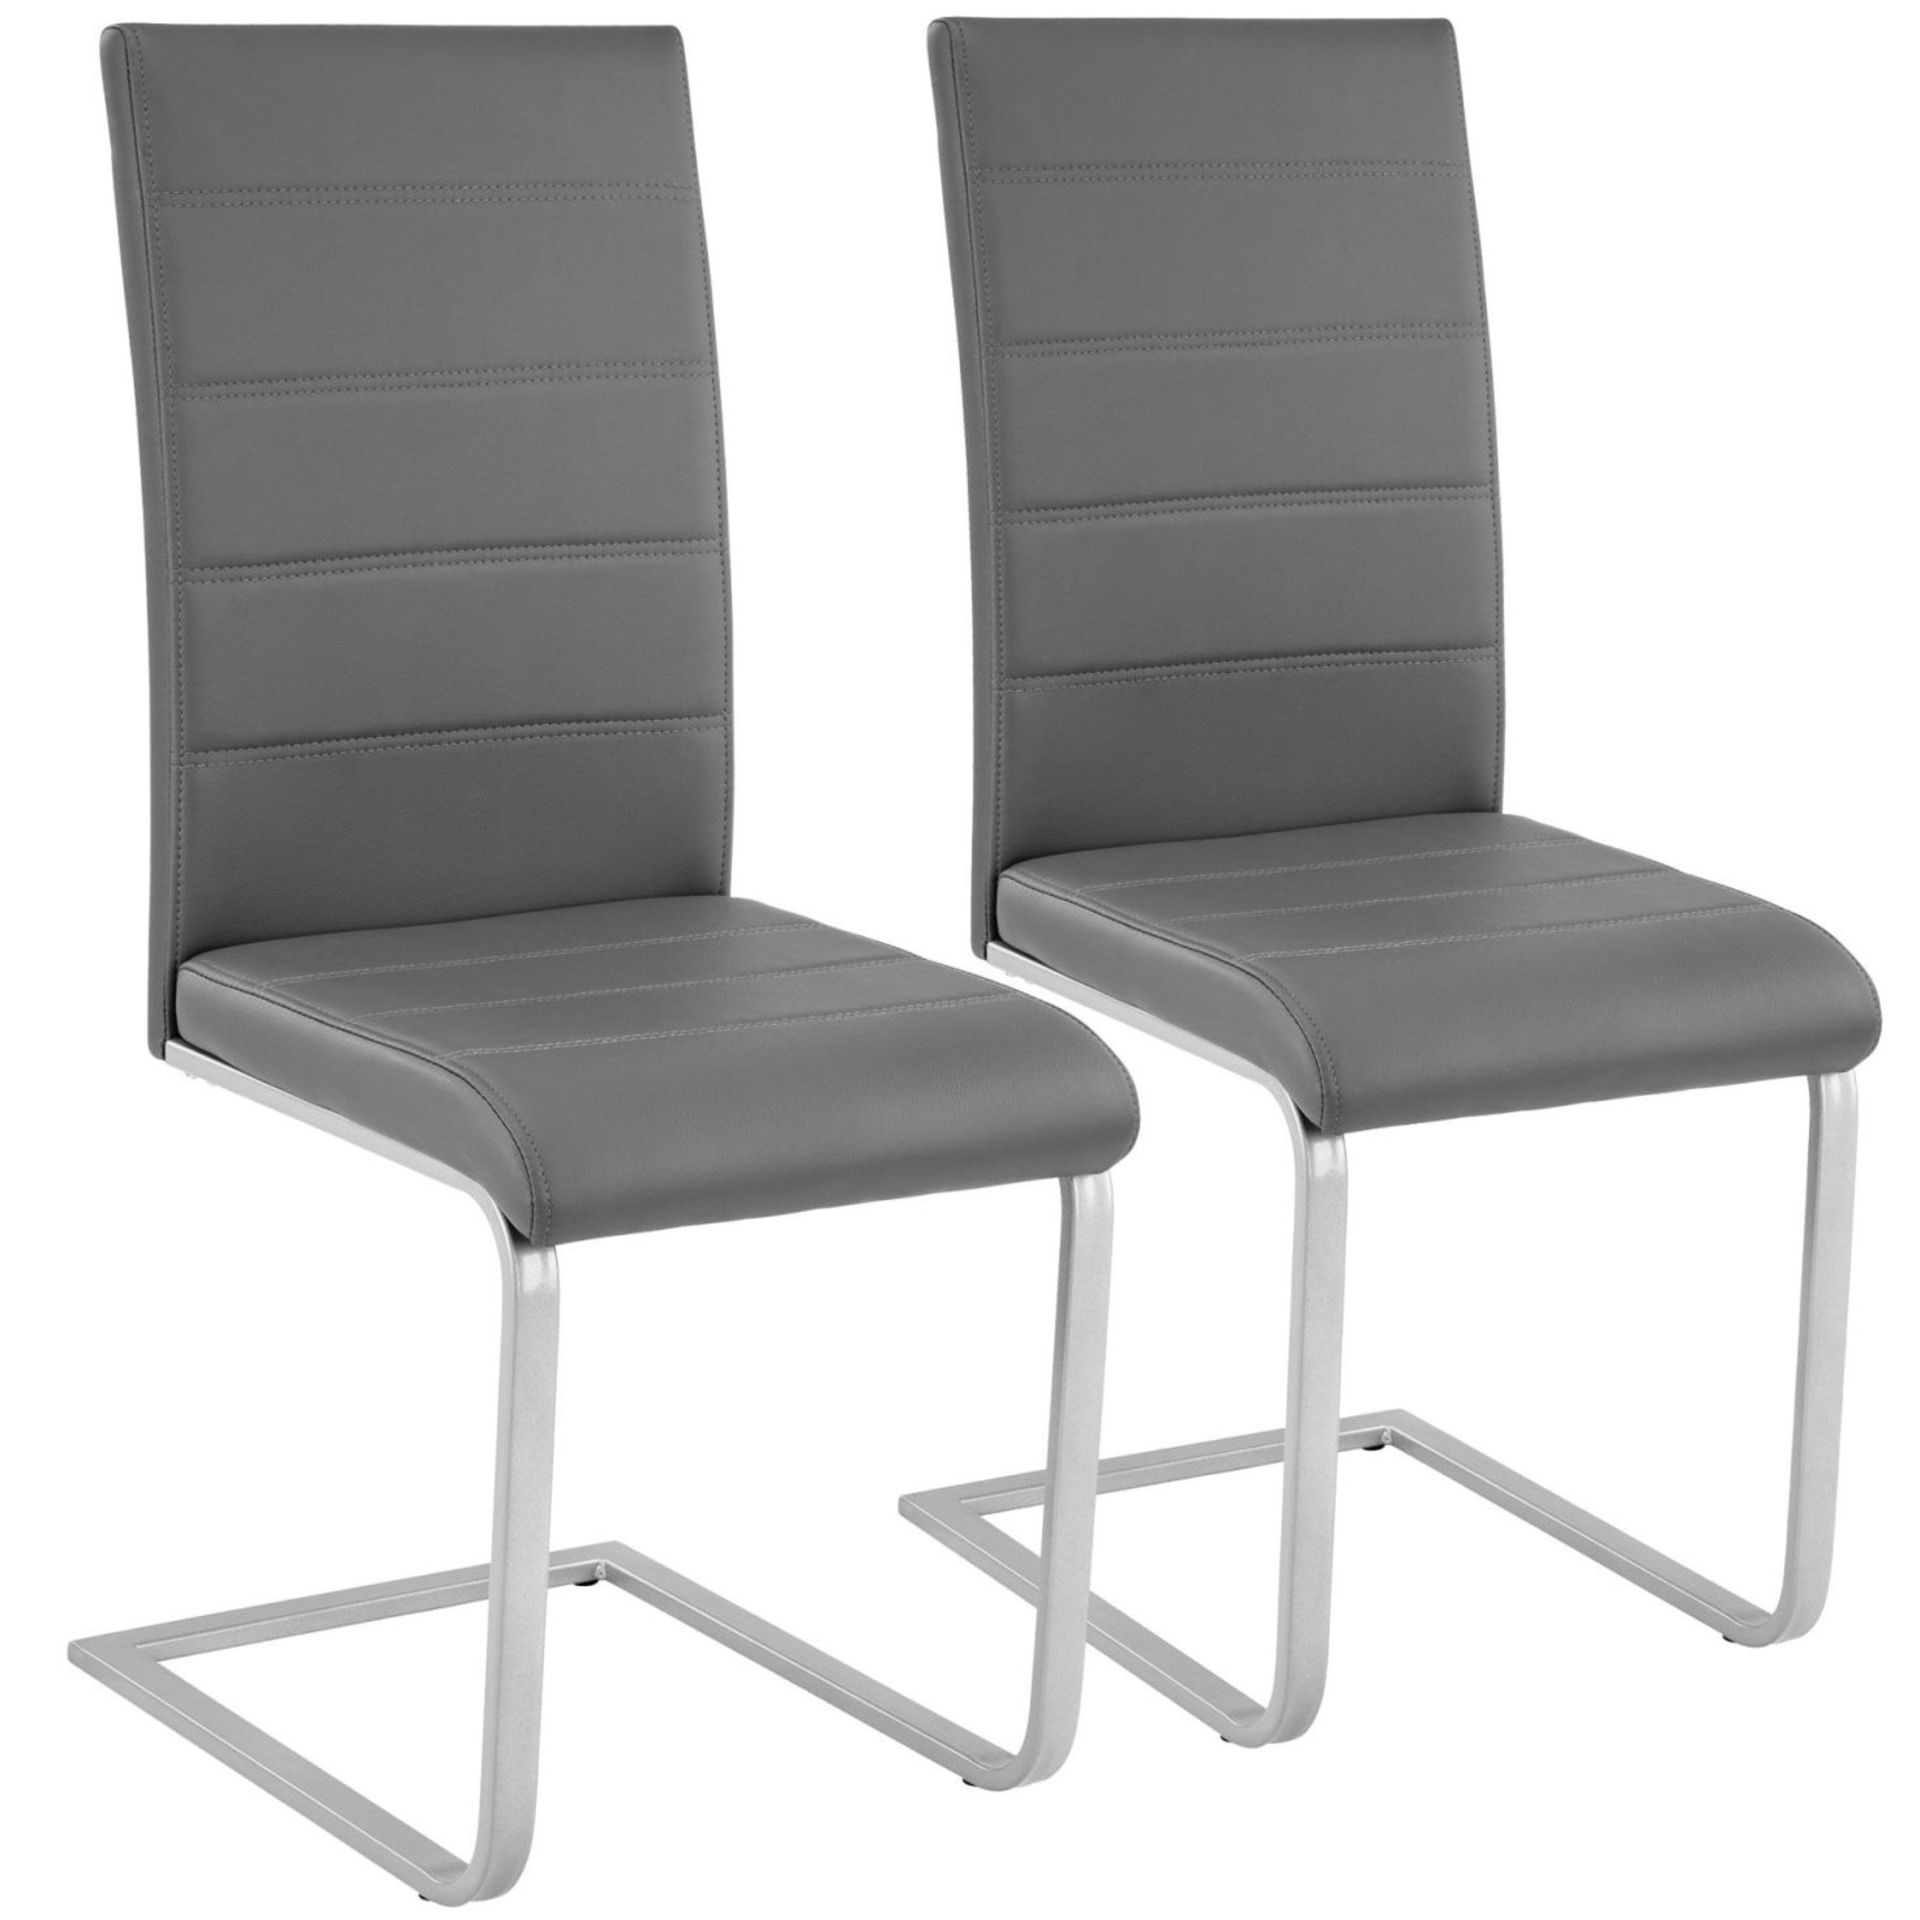 Tectake - 2 Dining Chairs Rocking Chairs Grey - boxed. RRP £99.99